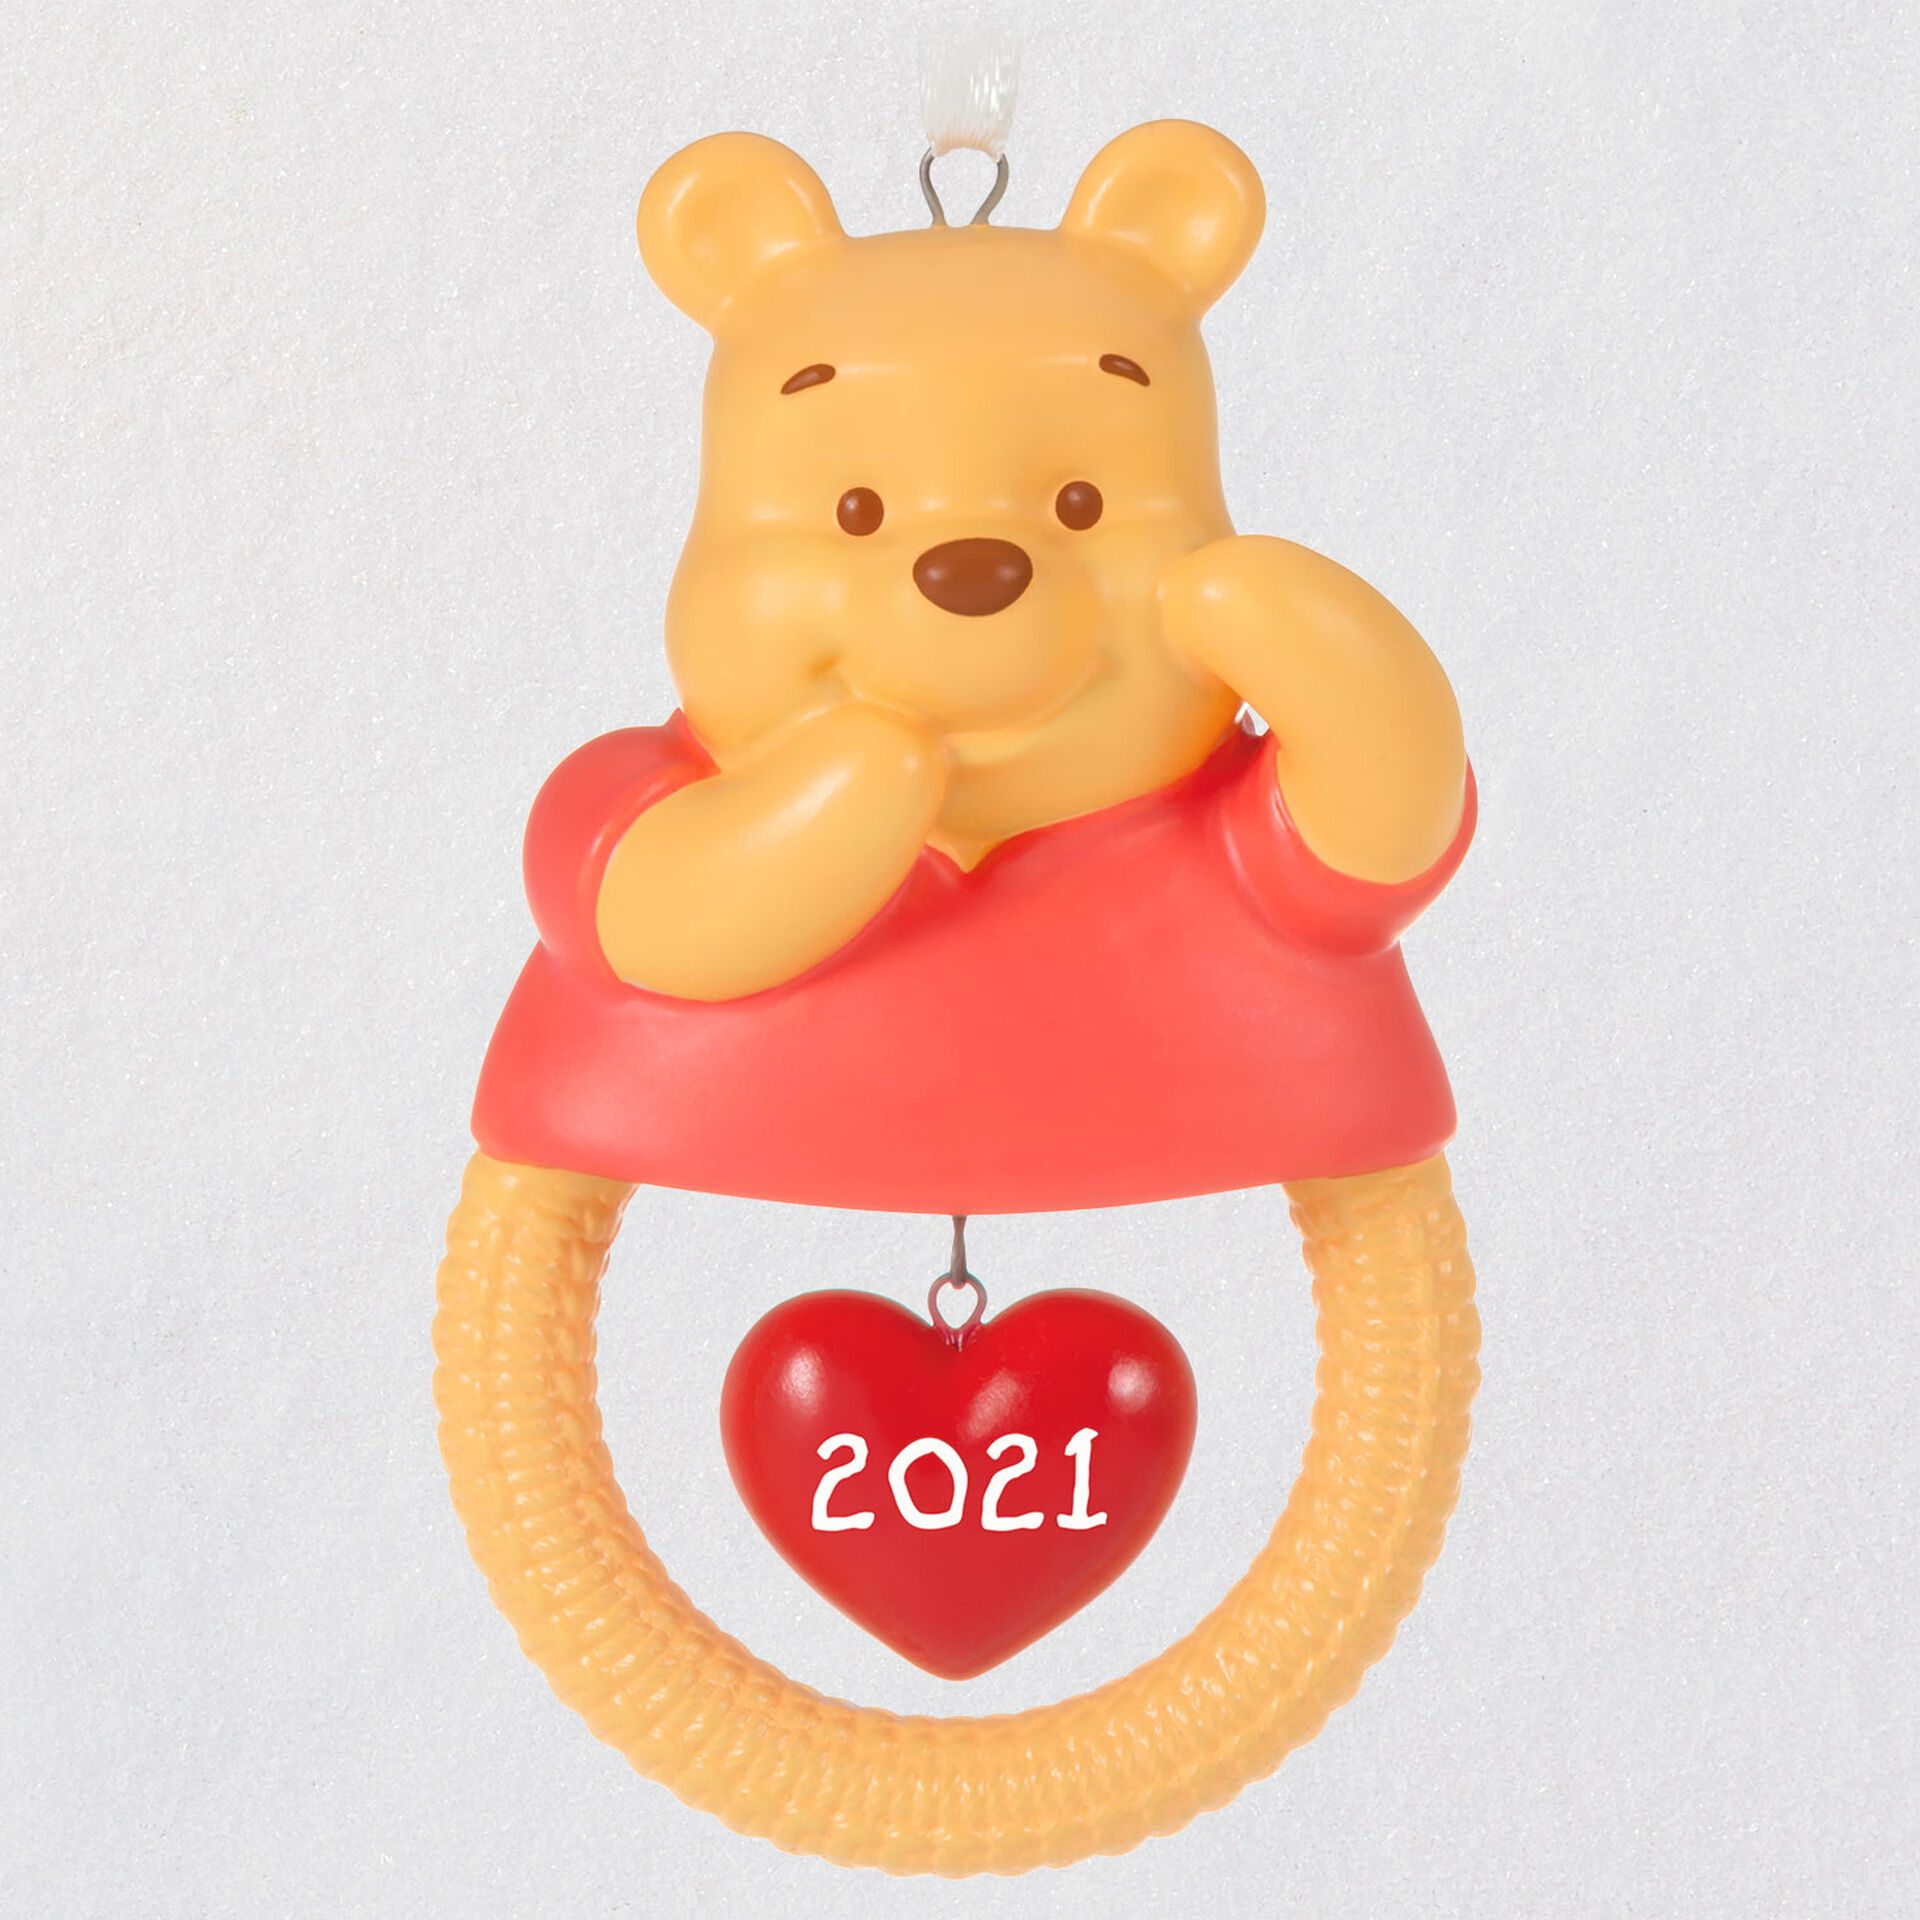 Disney Winnie the Pooh Baby's First Christmas 2021 Porcelain Ornament